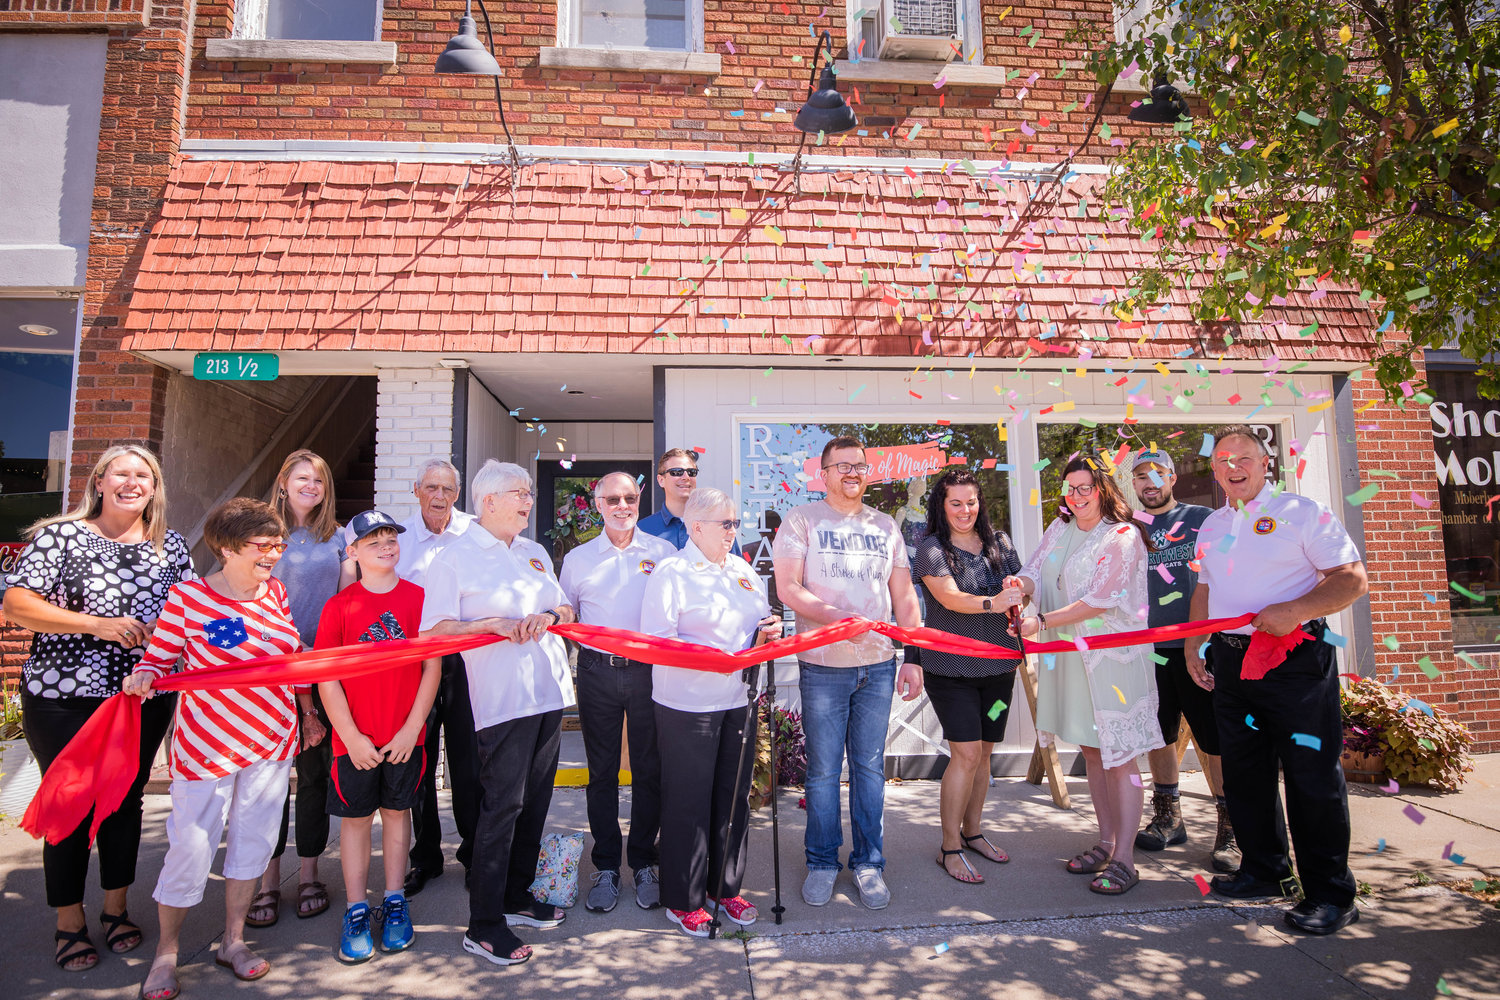 The Moberly Area Chamber of Commerce hosts a ribbon-cutting for local business A Stroke of Magic. The shop started at 215 W. Reed St. and now operates at both 213 and 215 W. Reed.